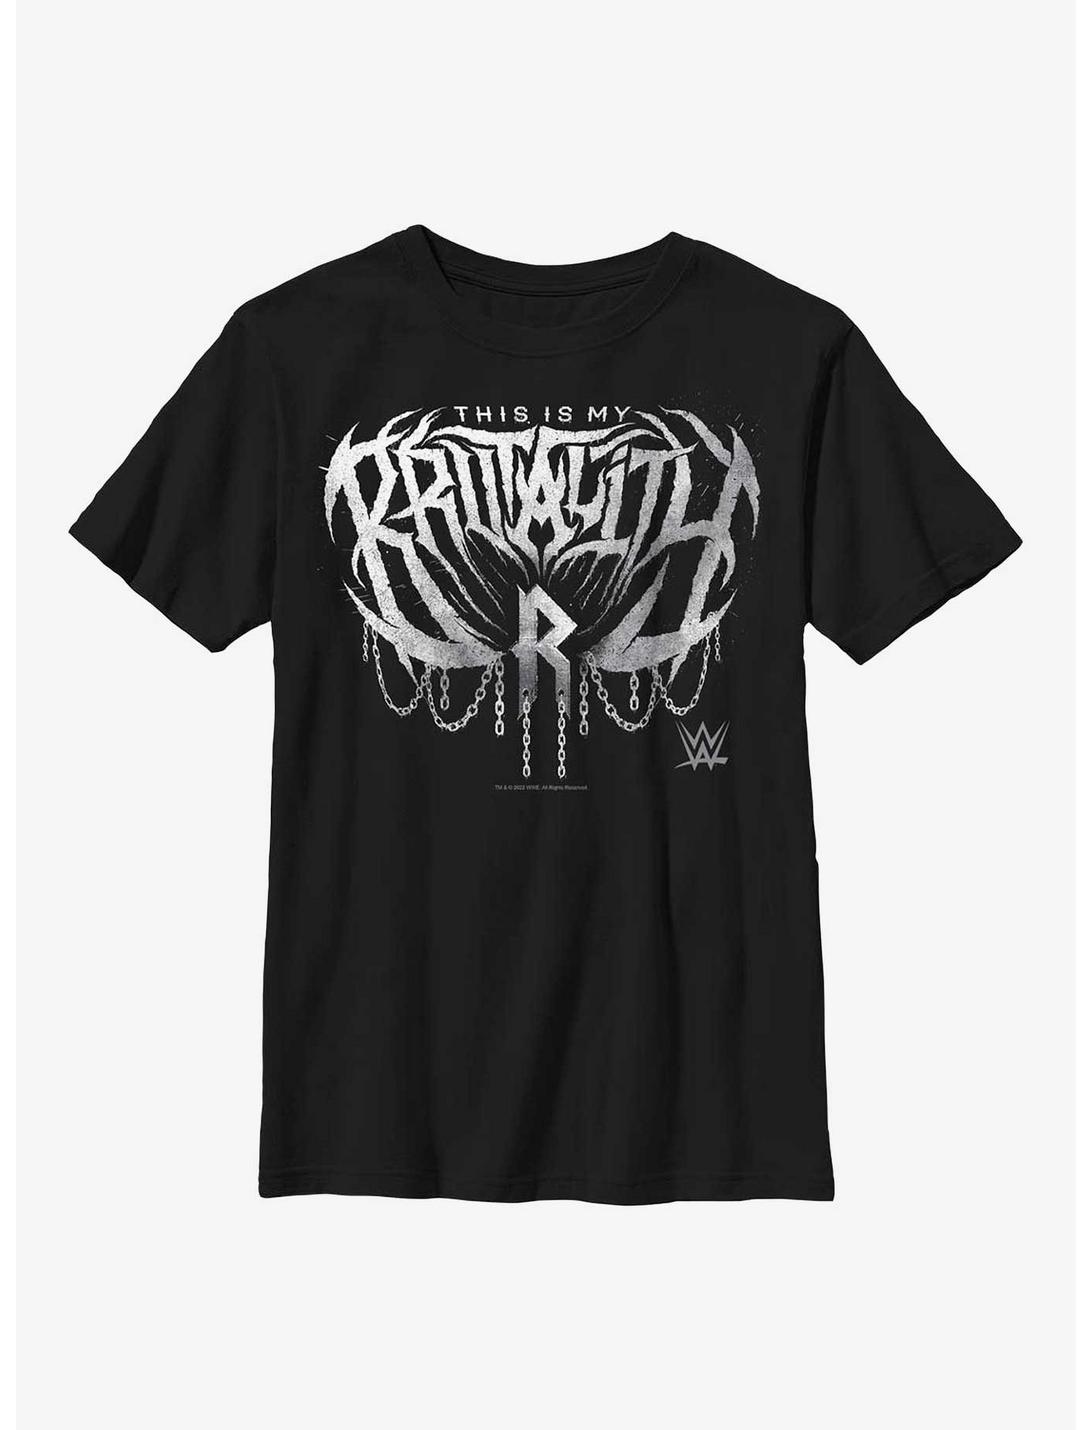 WWE Rhea Ripley This Is My Brutality Youth T-Shirt, BLACK, hi-res